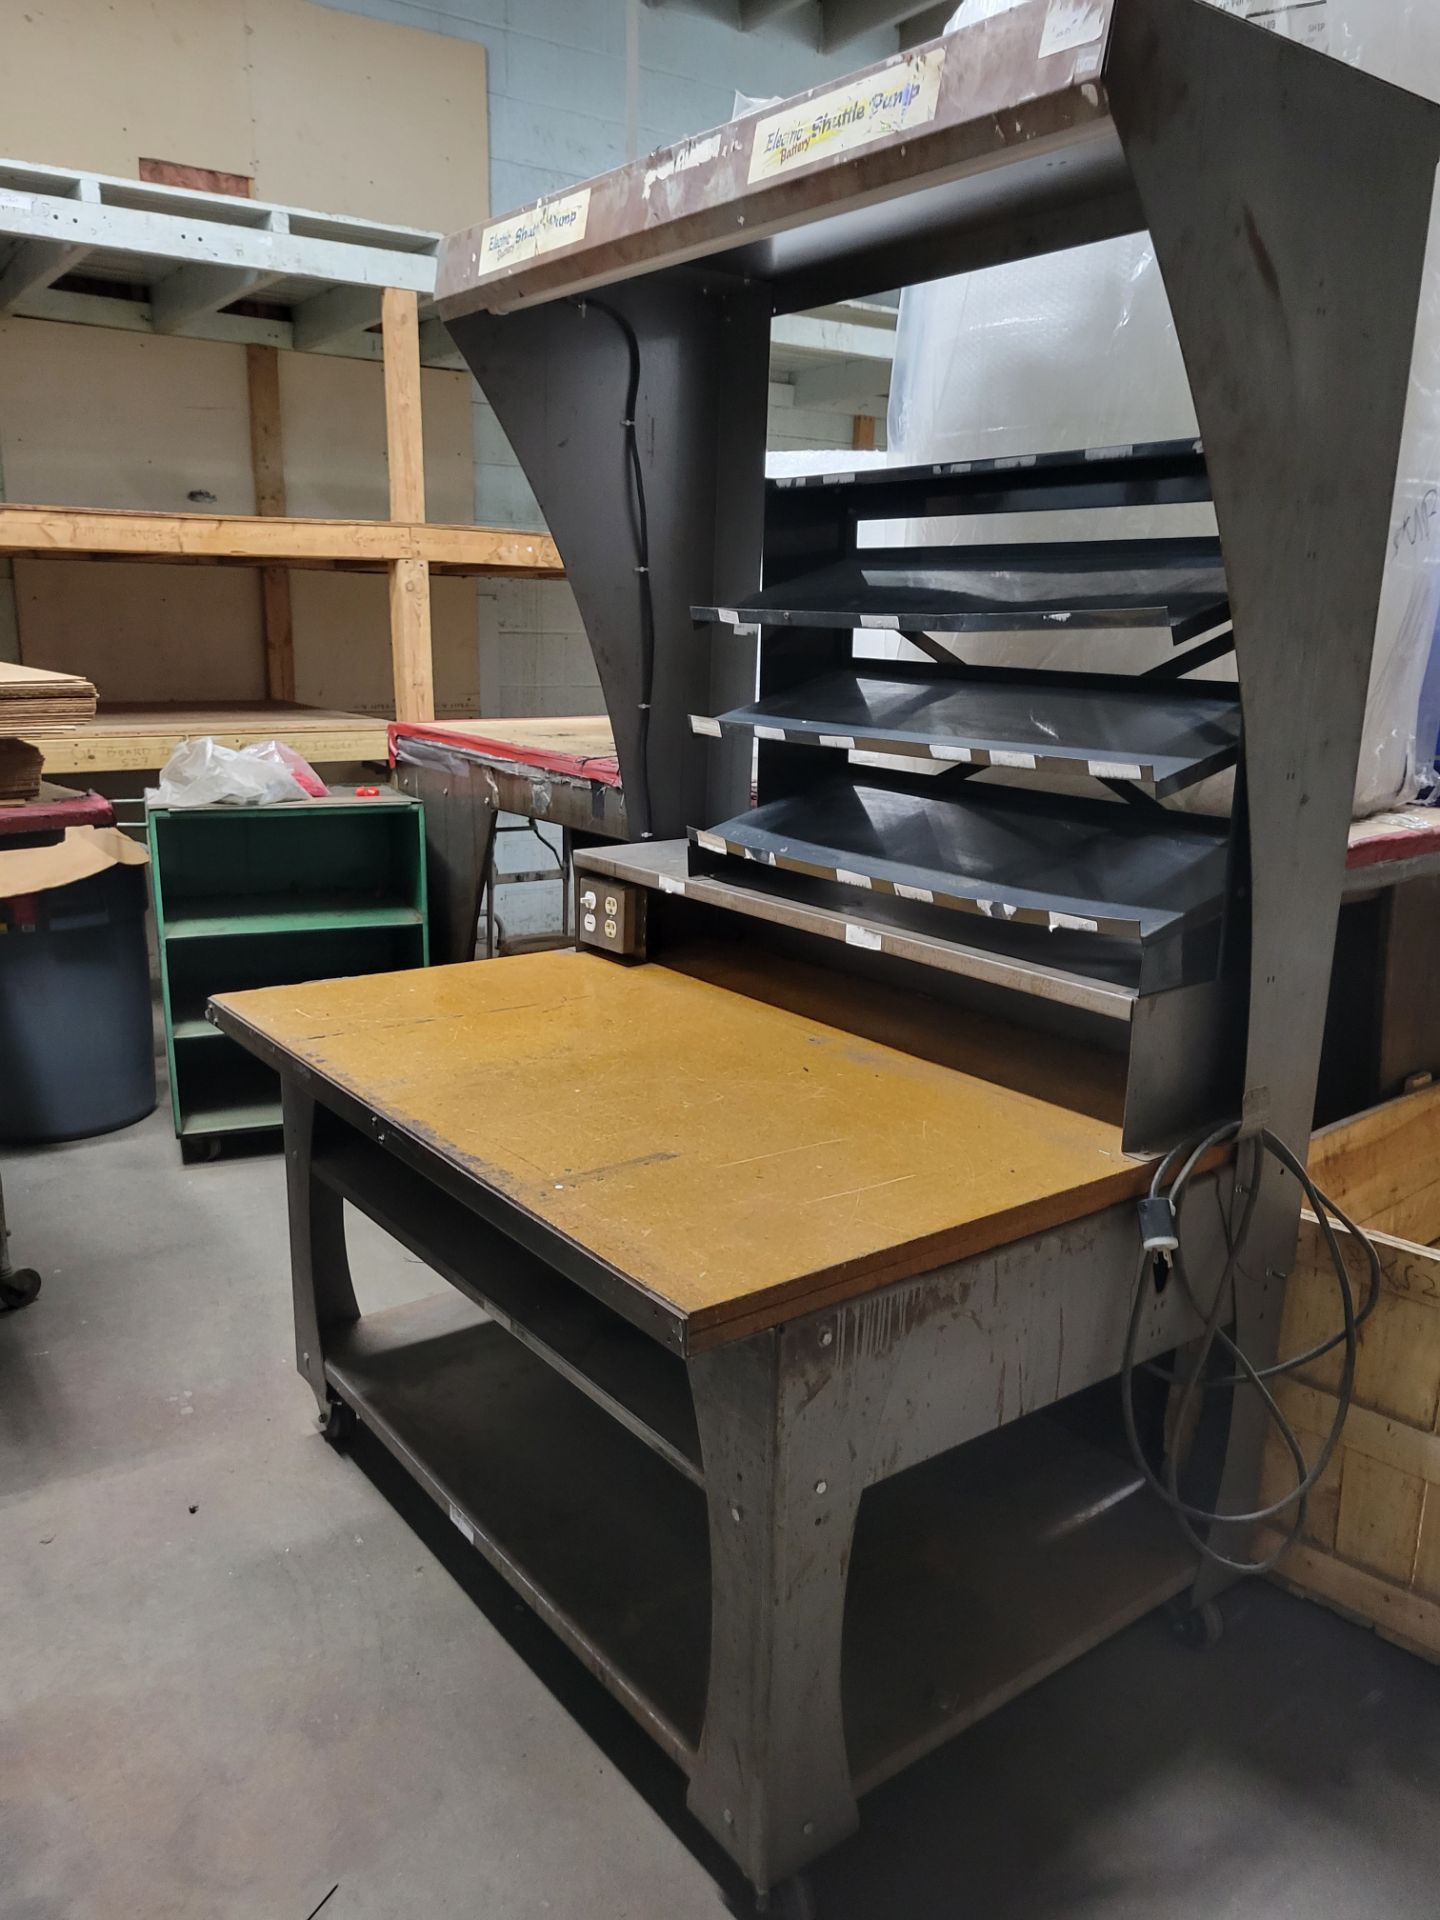 (1) Lighted Work Station. DIMS 3'1" deep x 4' wide x 6' high. Metal construction, Wood Working - Image 2 of 2